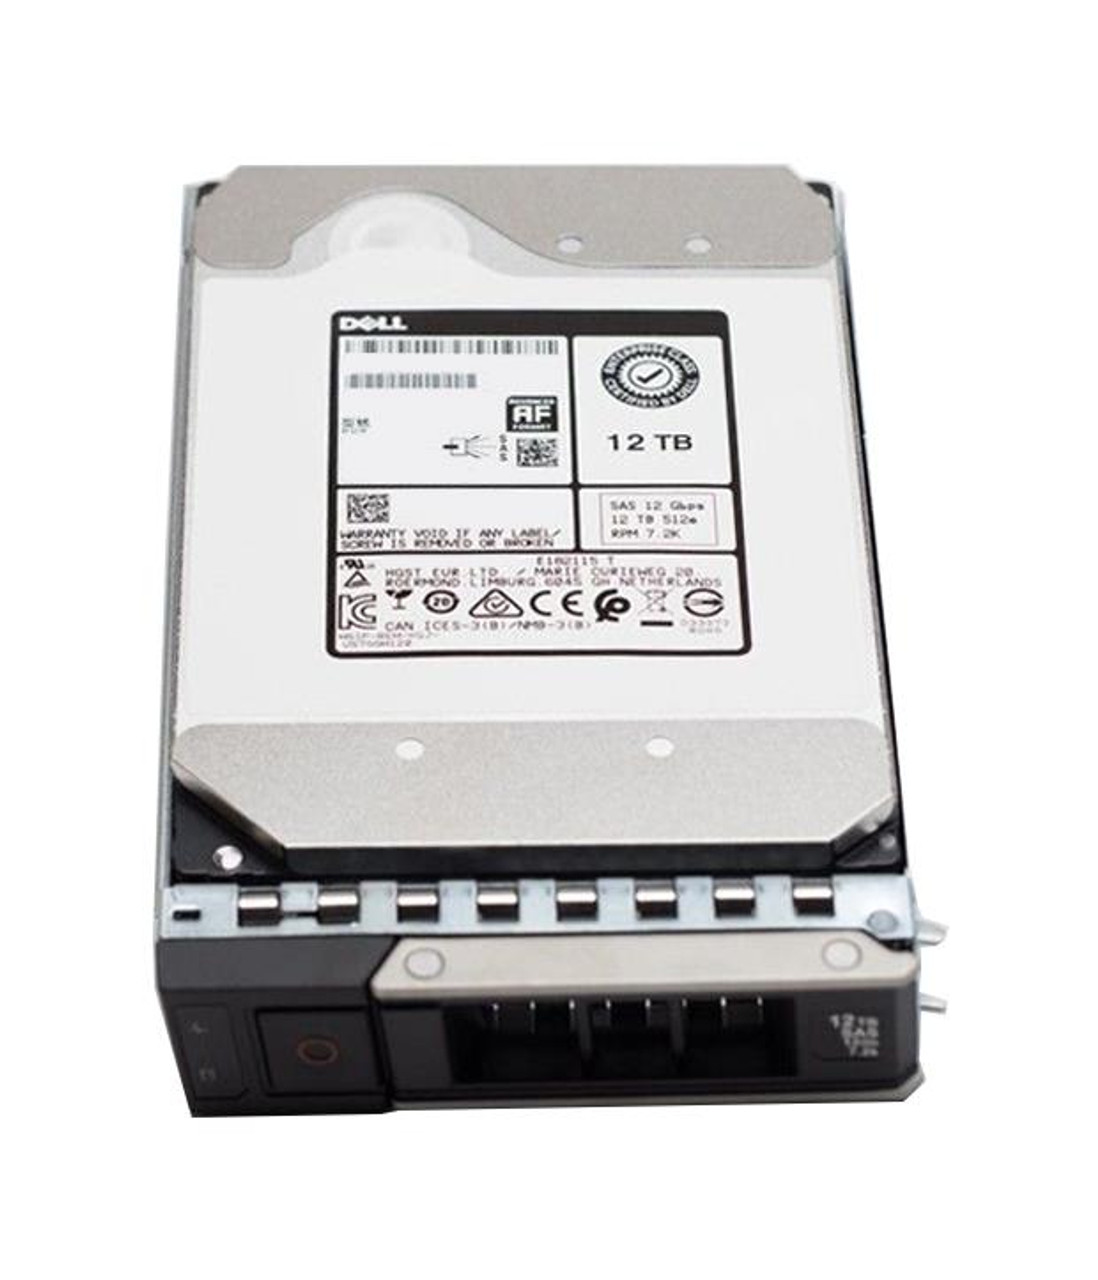 Dell 12TB 7200RPM SATA 6Gbps Hot Swap (512e) 3.5-inch Hard Drive with Tray